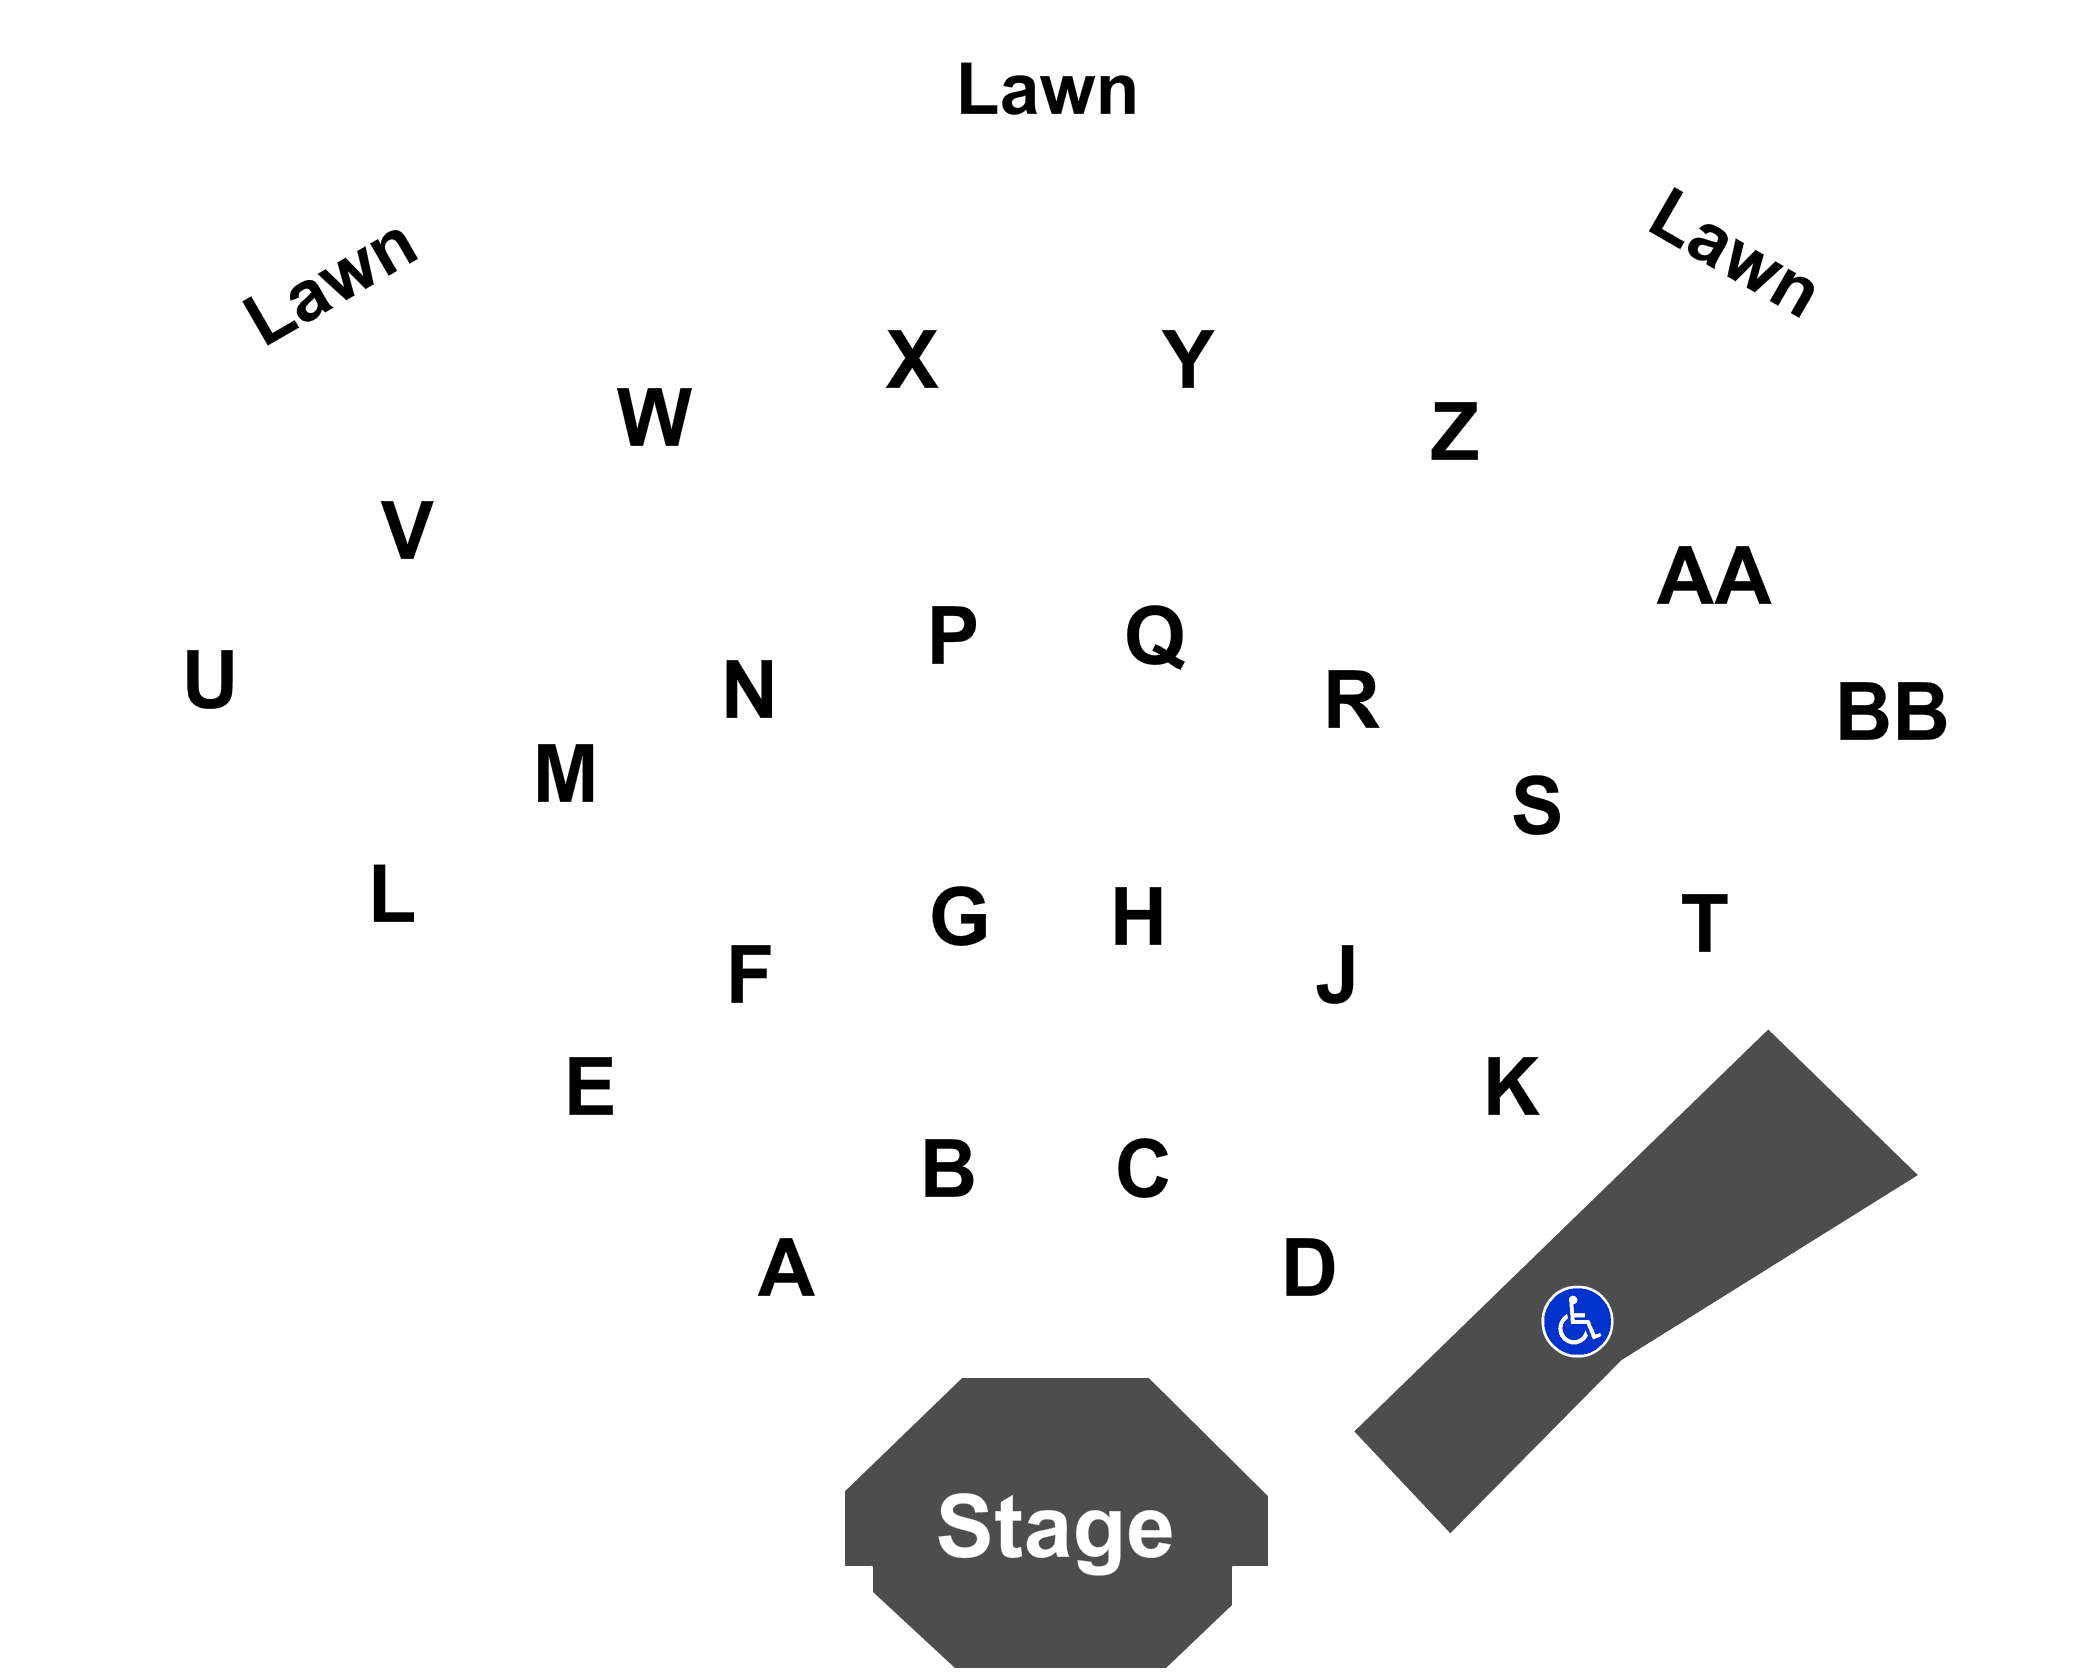 Dell Seating Chart